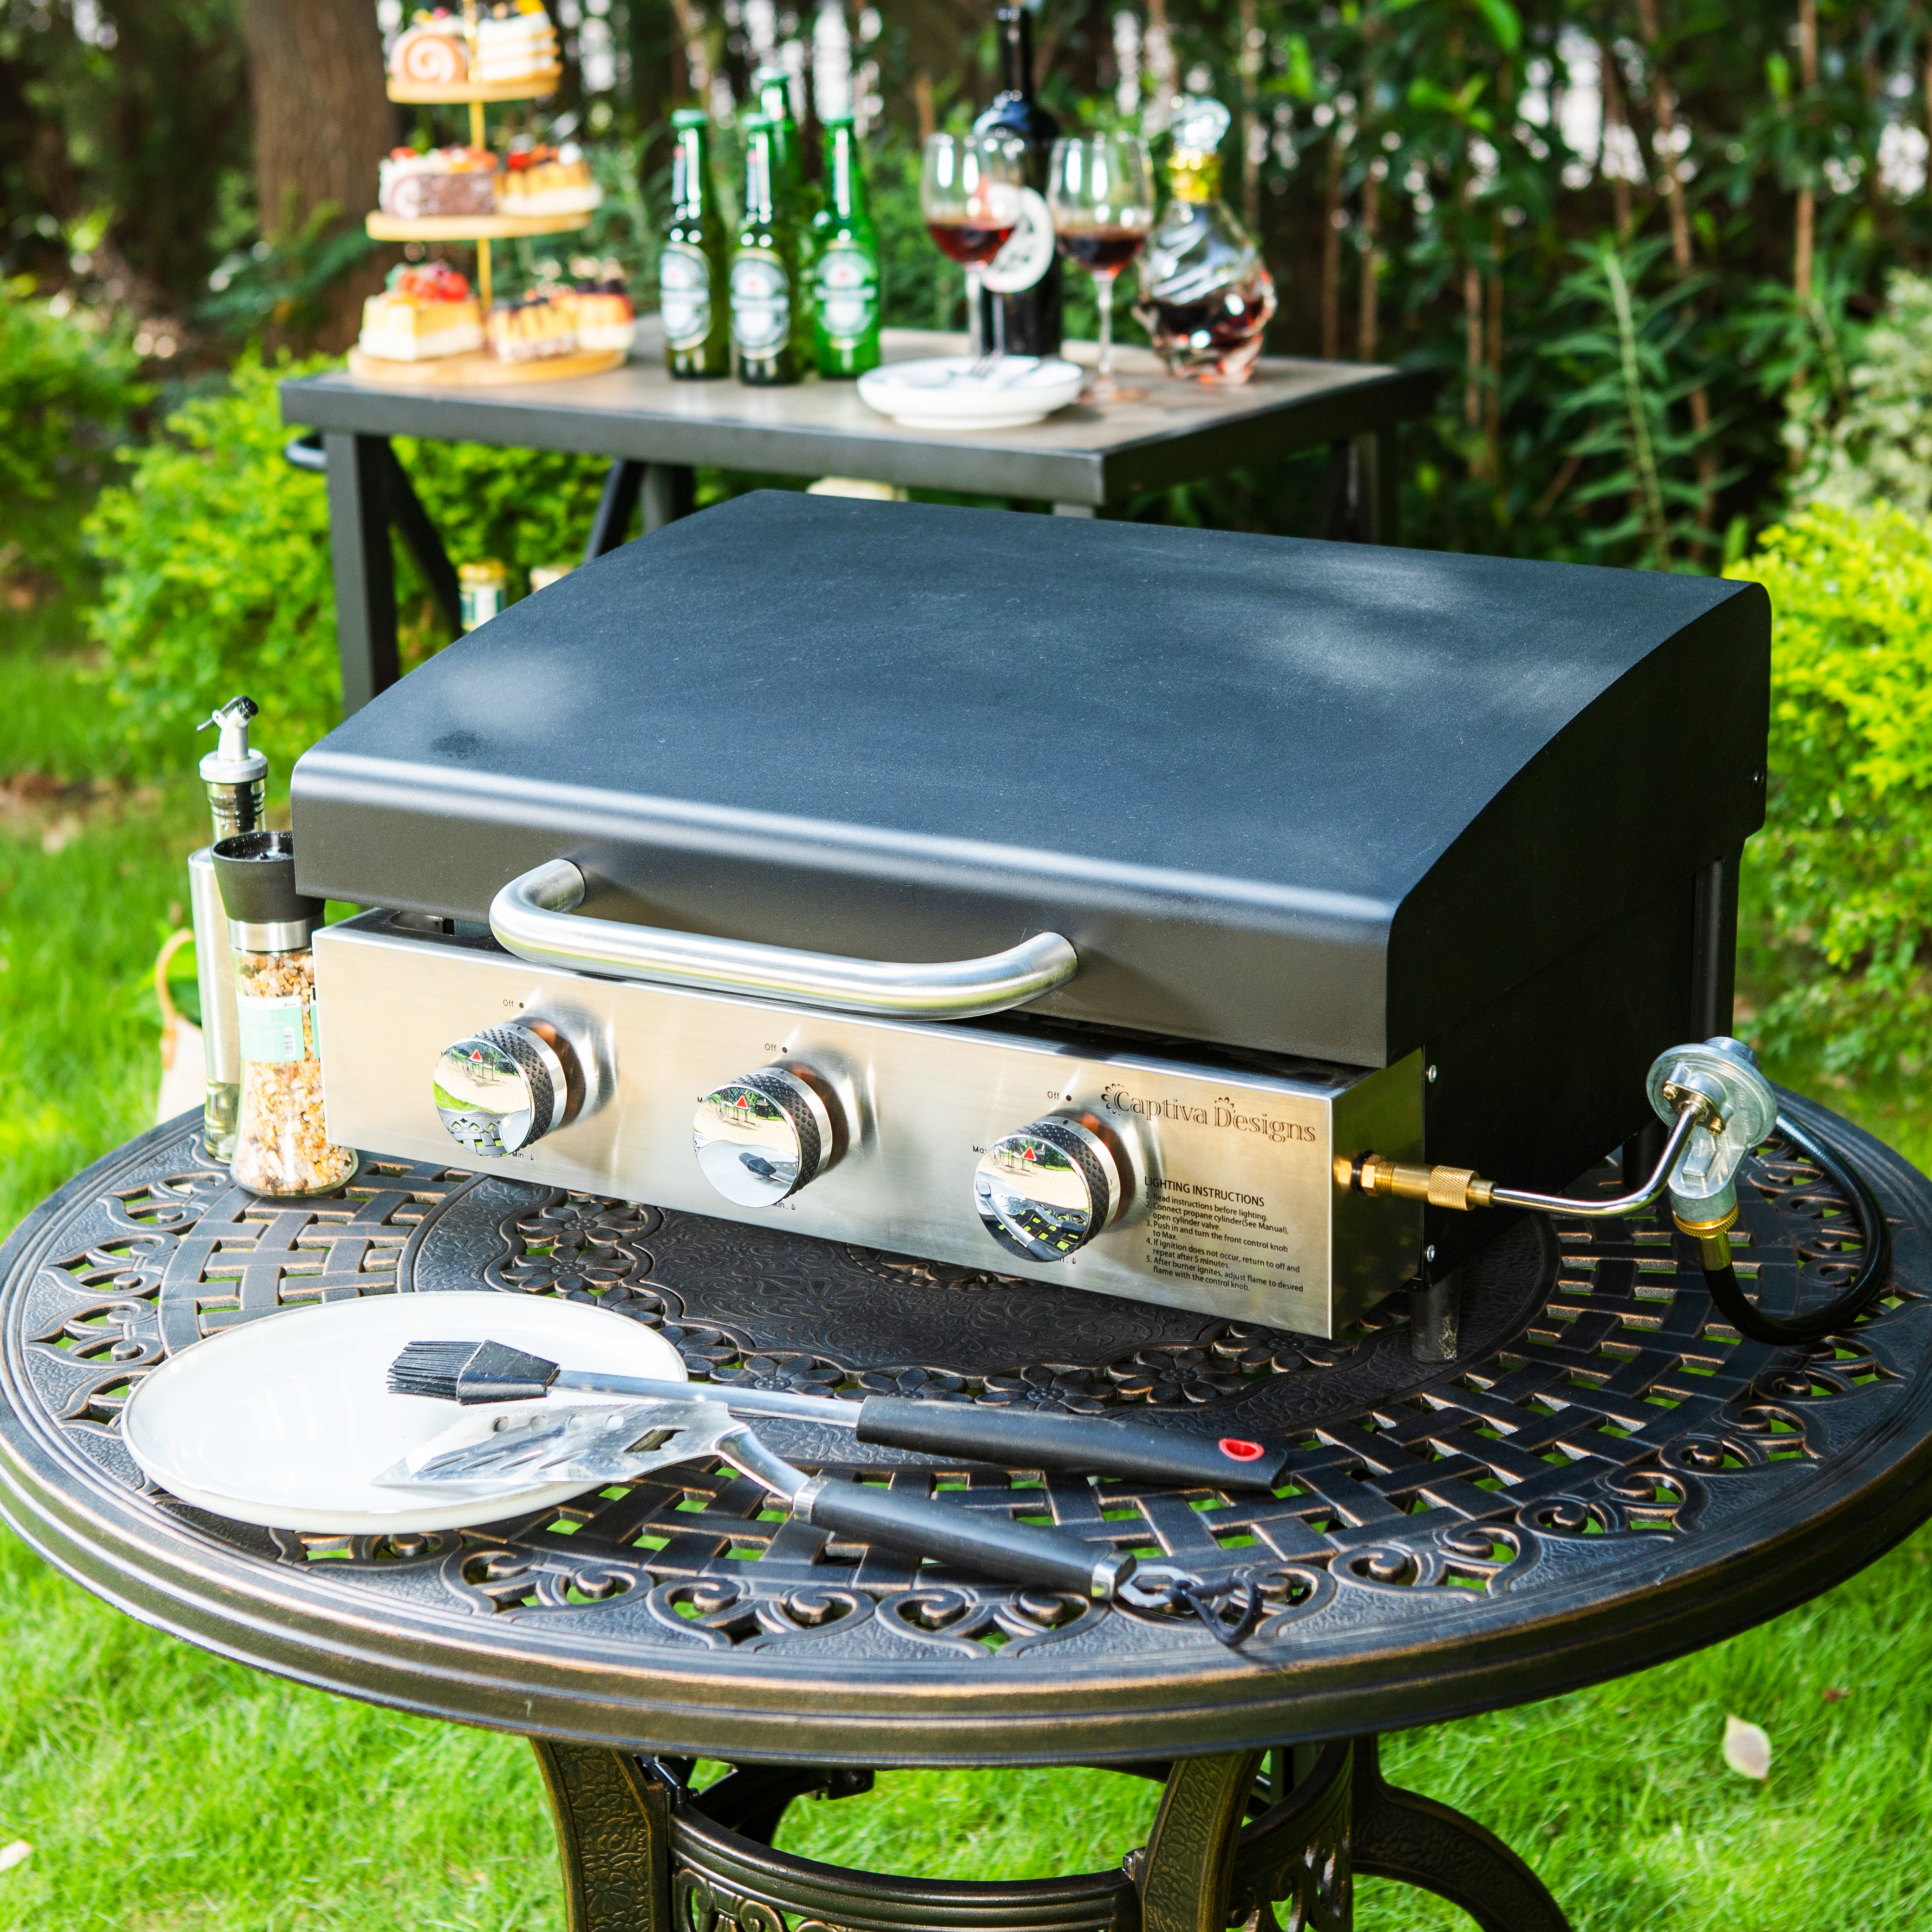 Captiva Designs Portable TableTop Propane Grill with 2 Stainless Steel